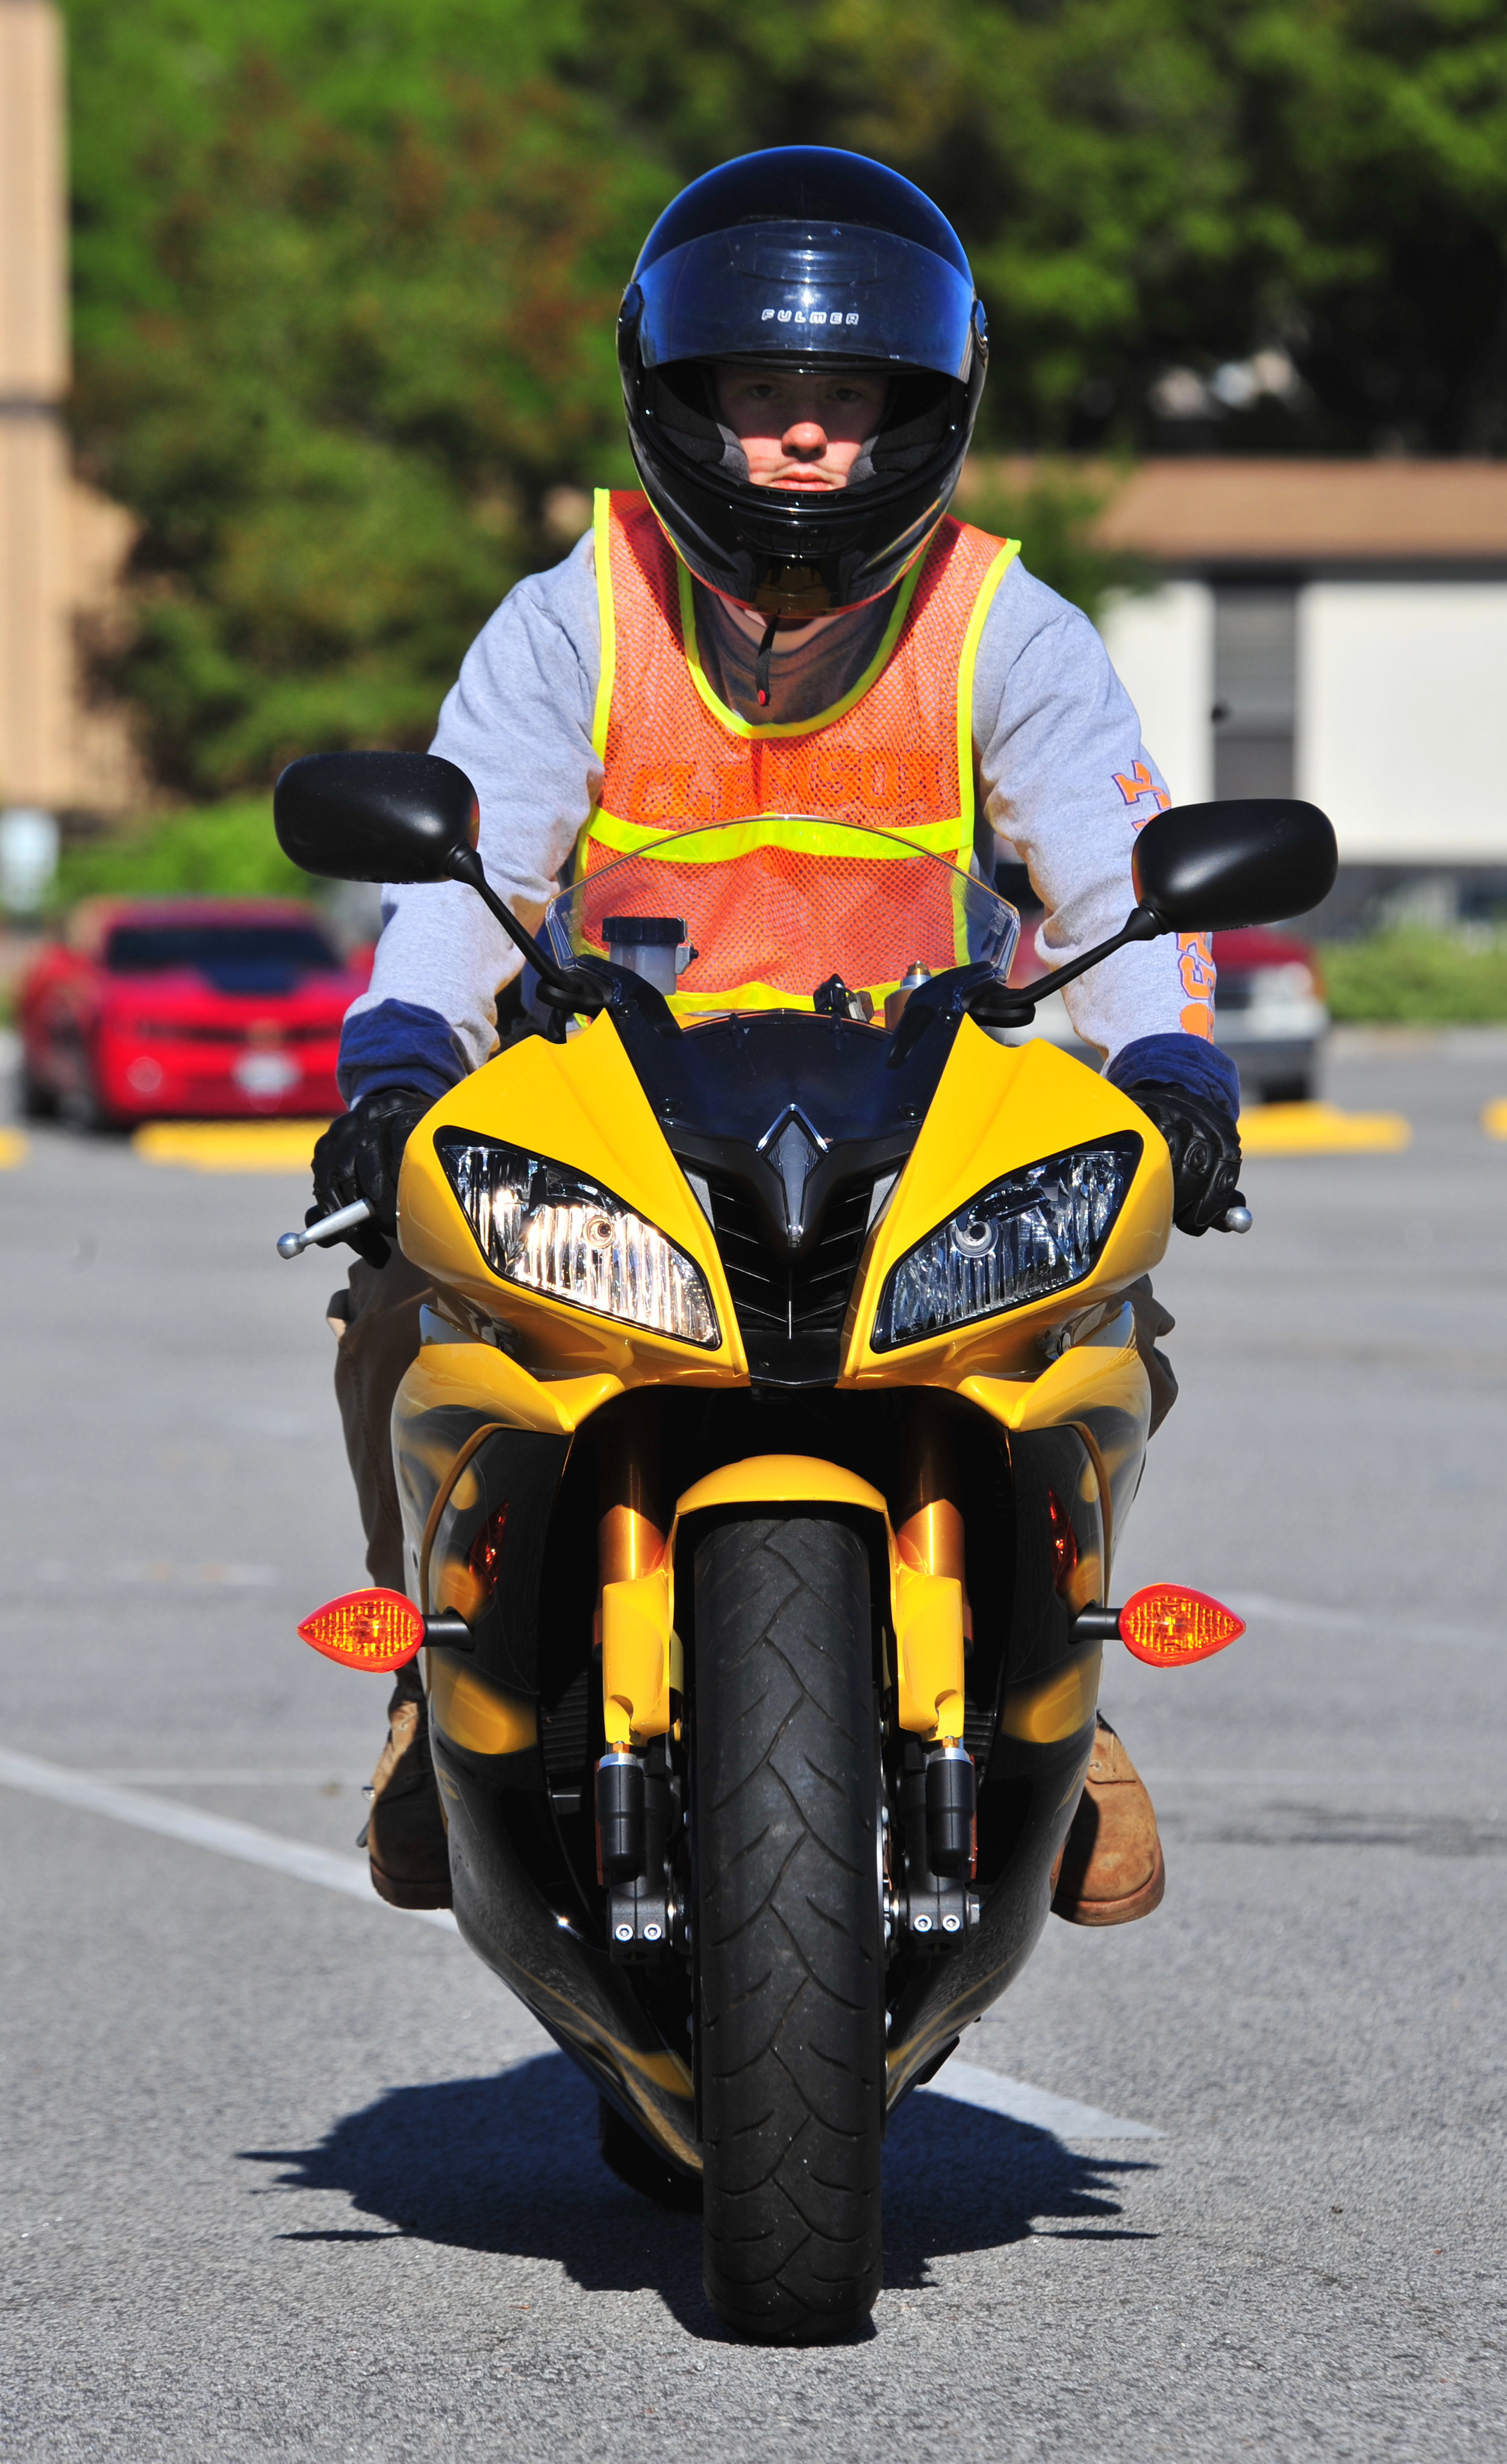 Motorcycle safety starts with you > Shaw Air Force Base > Display